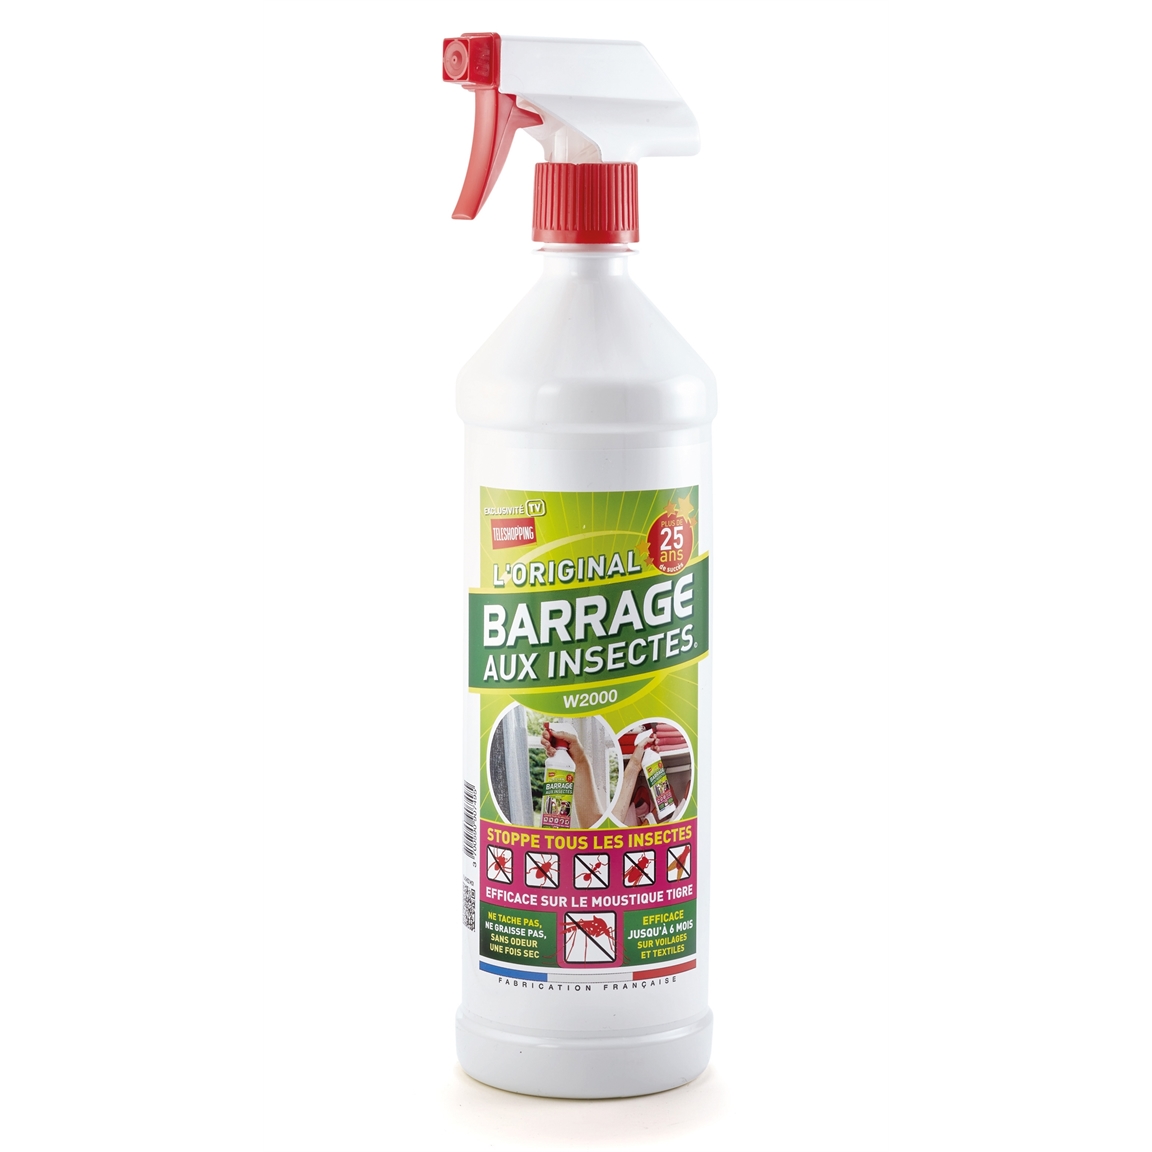 Barrage Anti Insecte pas cher - Achat neuf et occasion